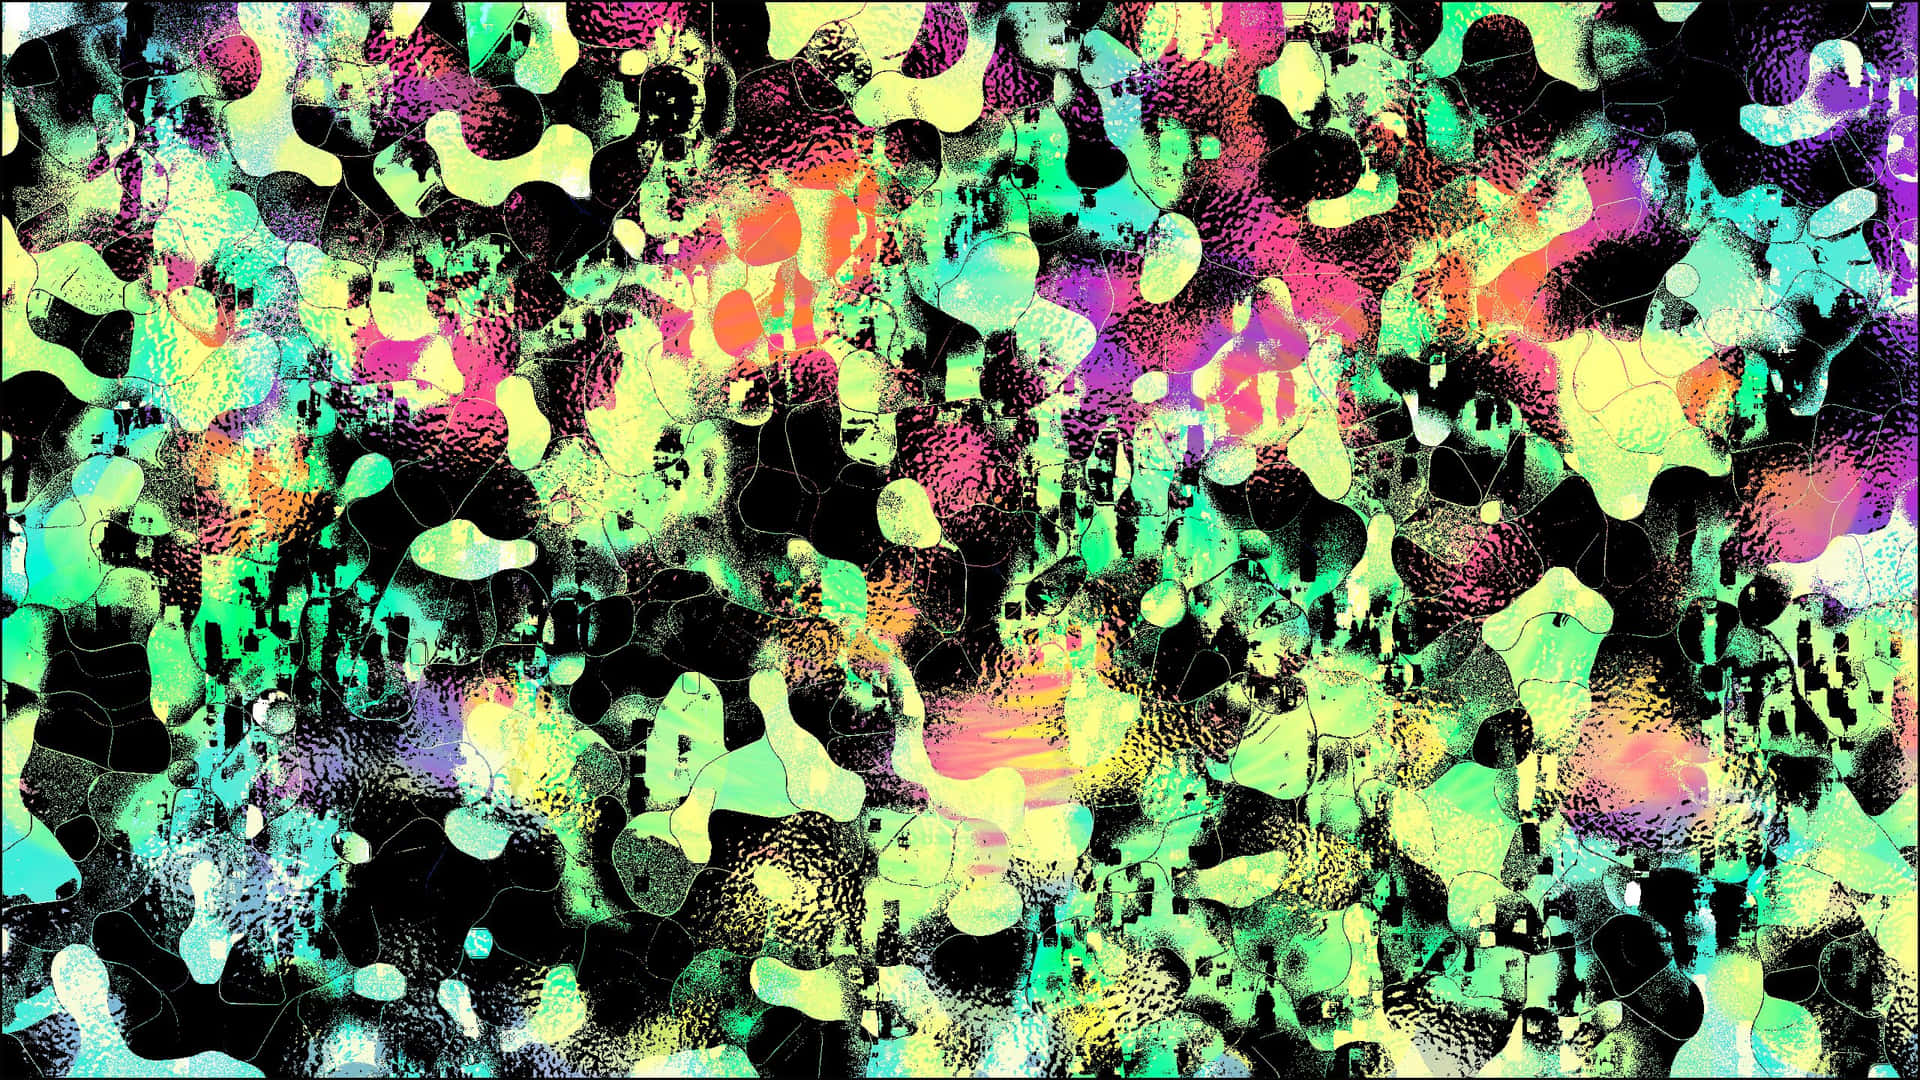 A mesmerizing digital journey into the colorful world of trippy fractals Wallpaper